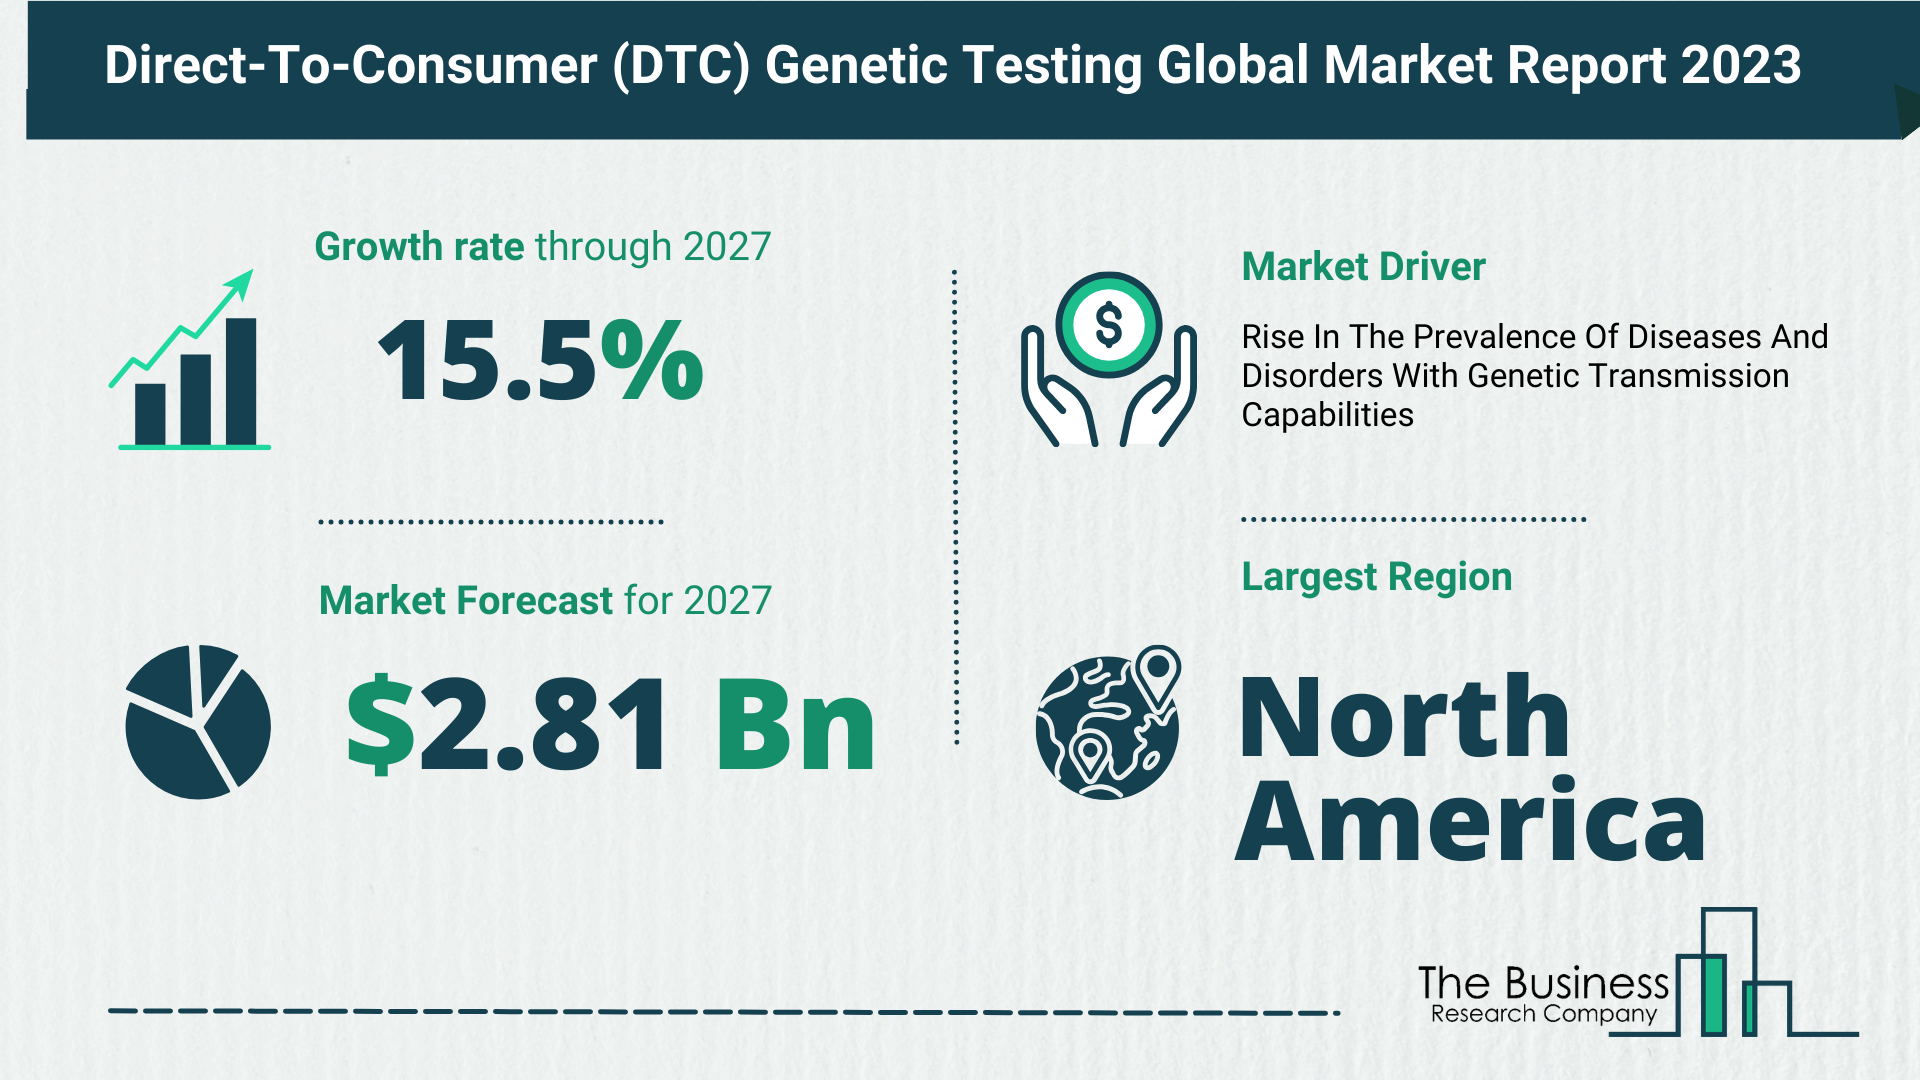 Global Direct-To-Consumer (DTC) Genetic Testing Market